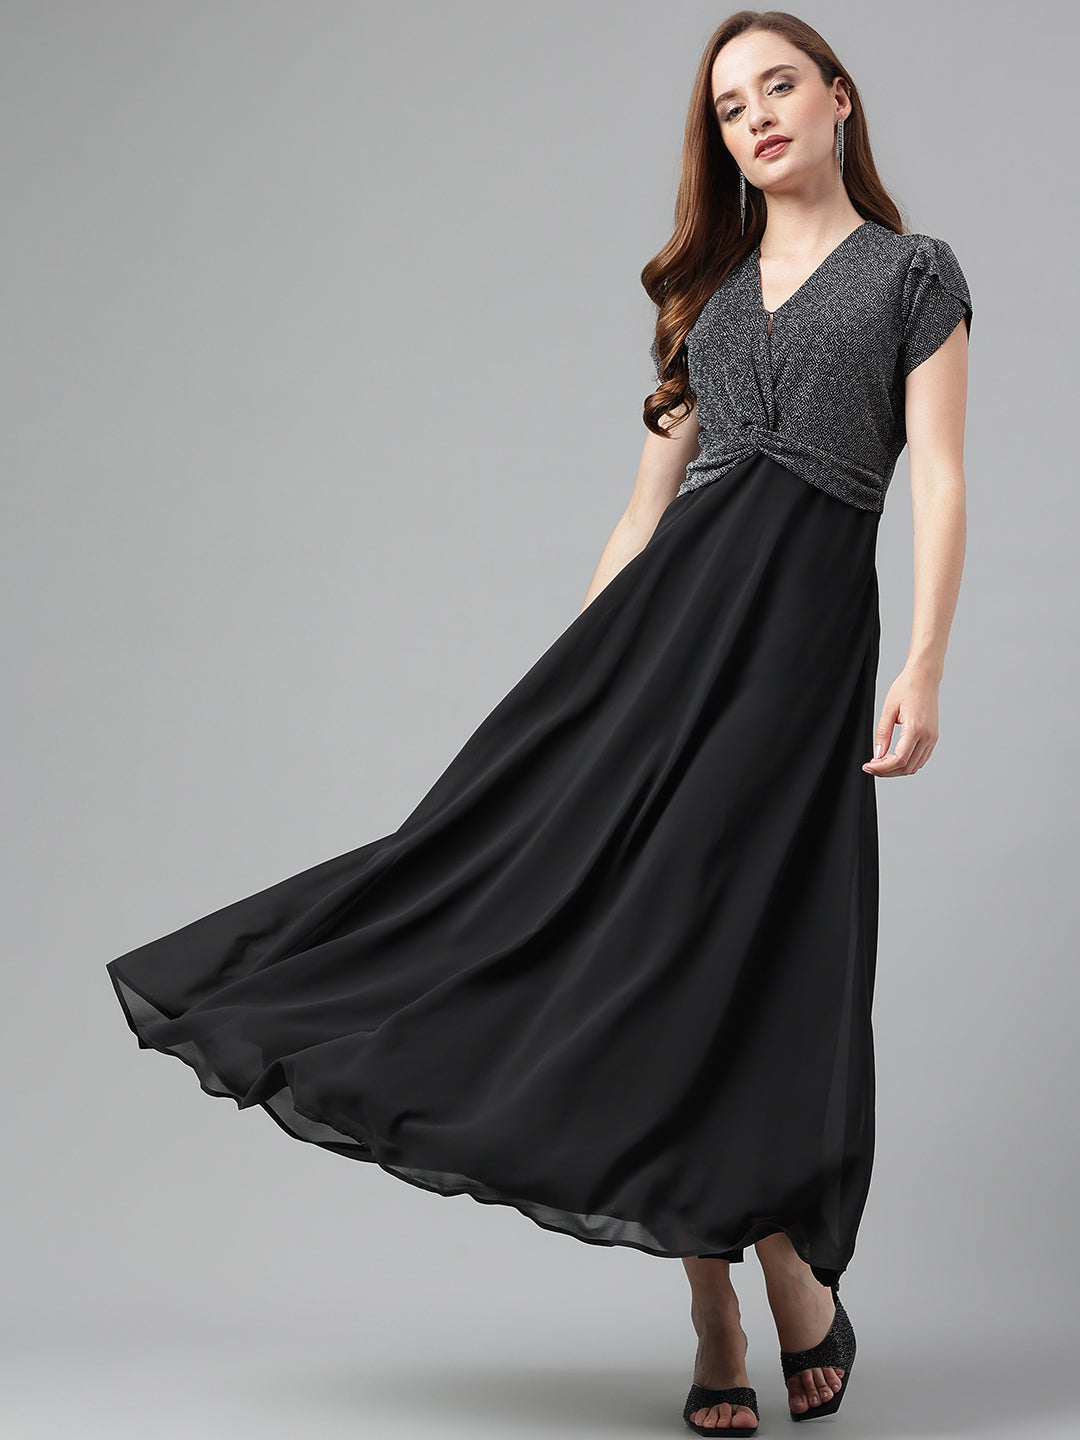 Black Short Sleeves V-Neck Solid Maxi Dress For Casual Wear